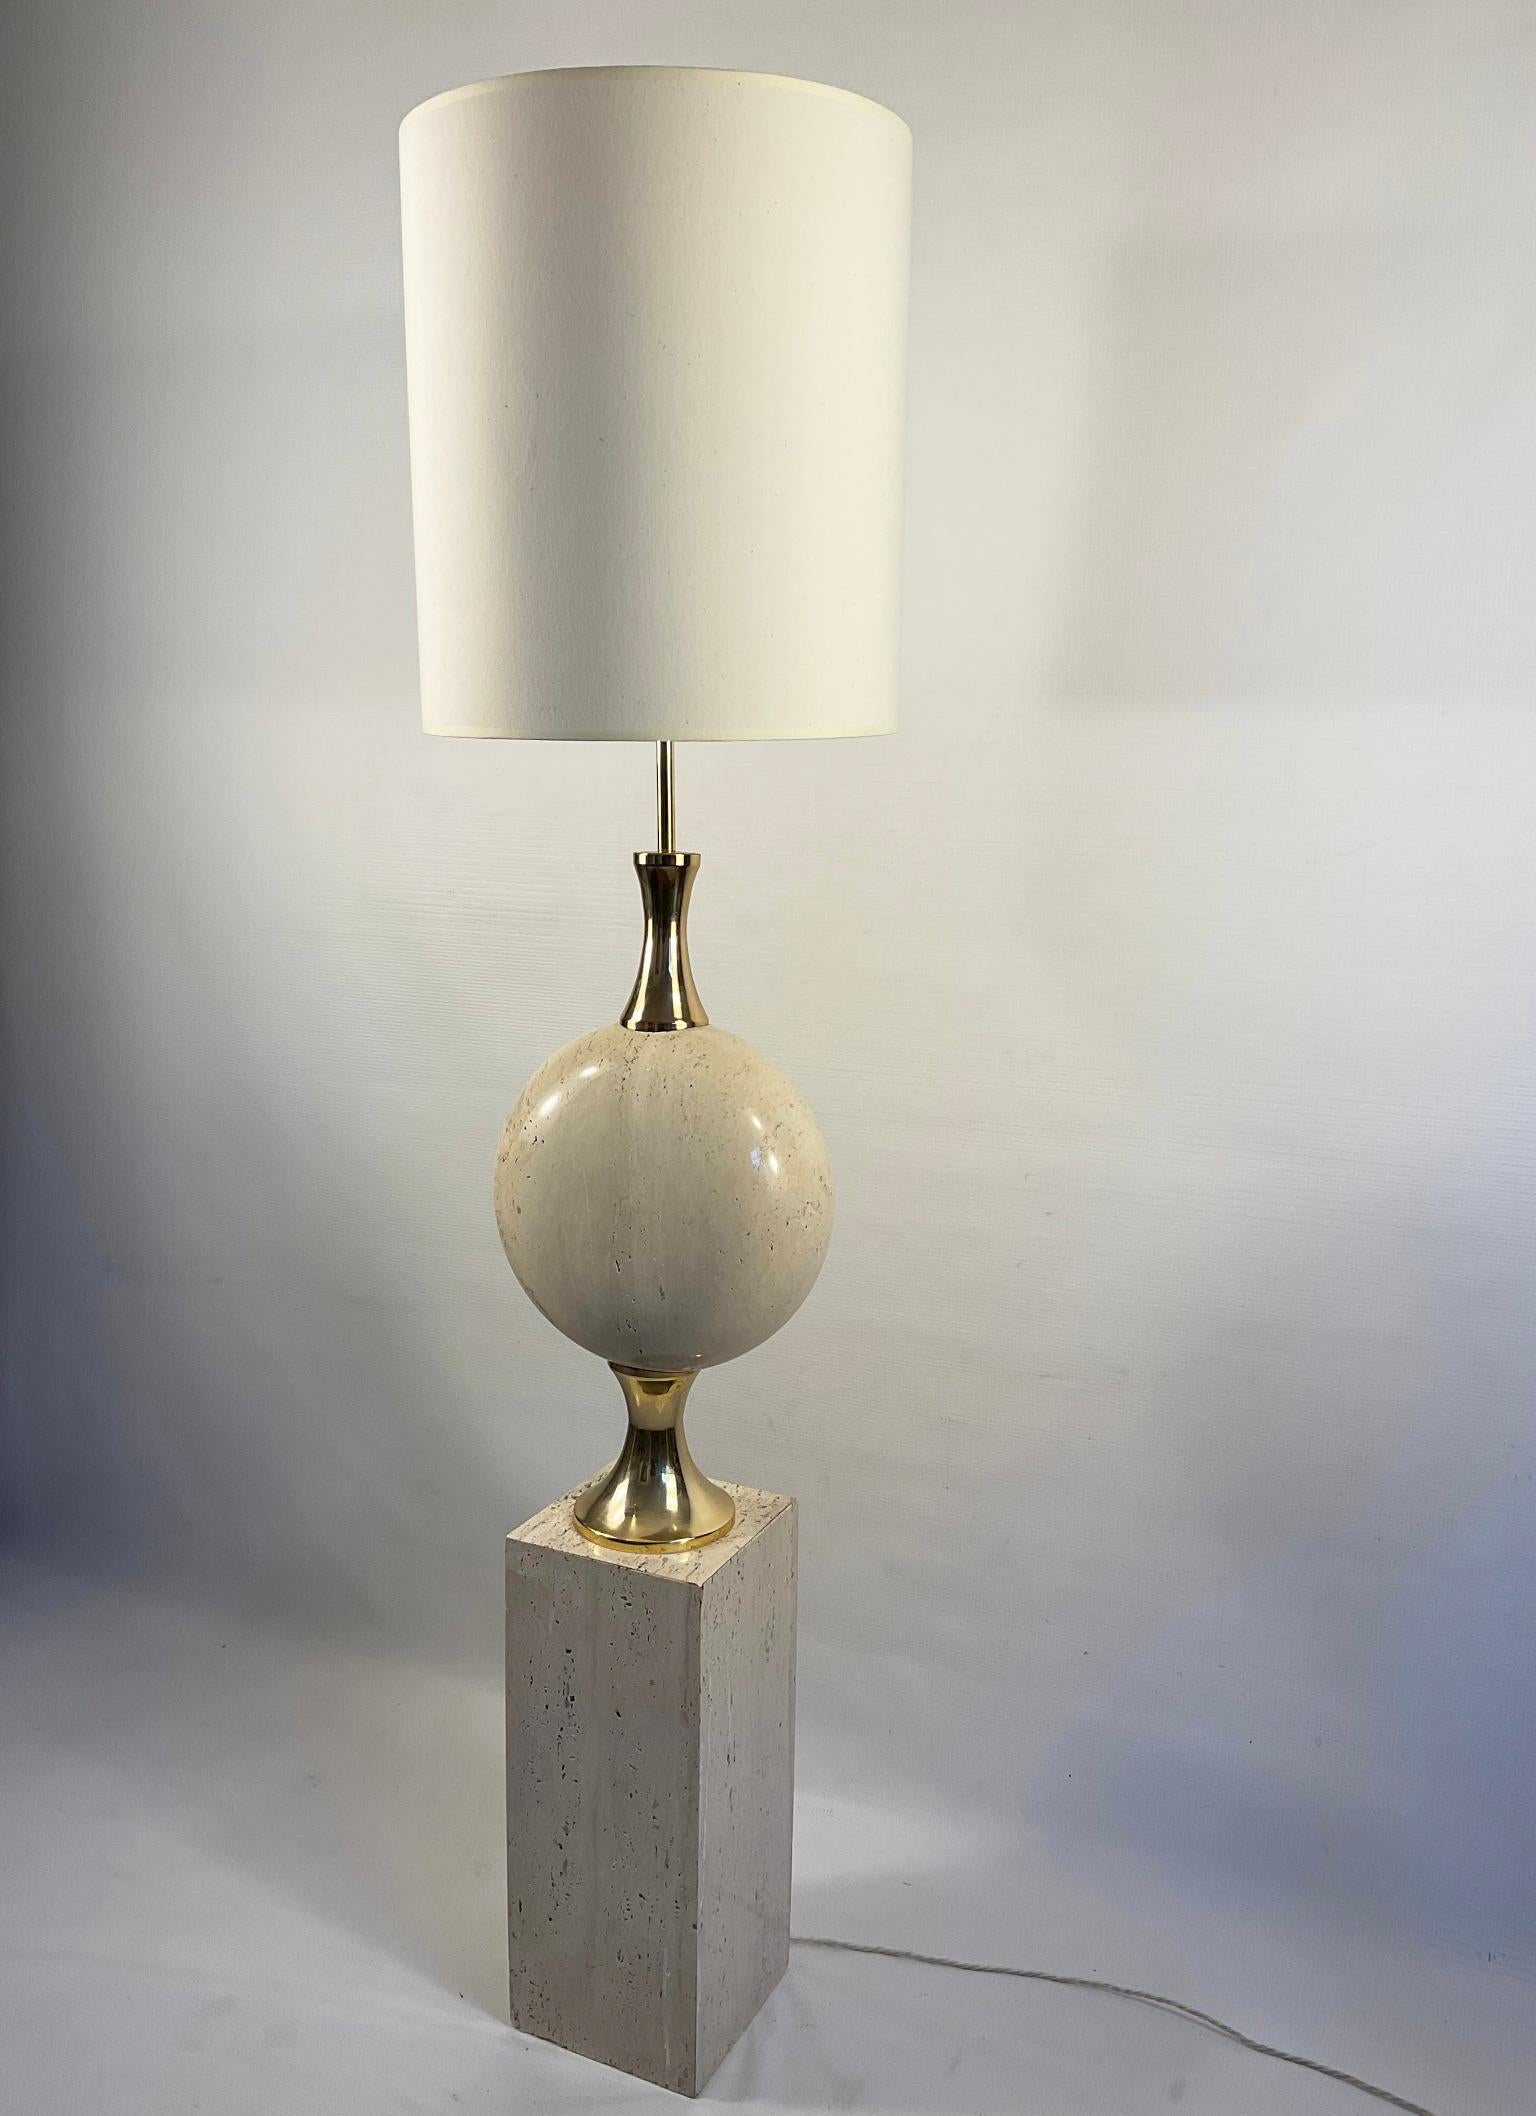 1970s Large Travertine Floor Lamp design by Philippe Barbier for Maison Barbier Paris France.
Includes linen shade with two light bulbs and an in-line foot switch.